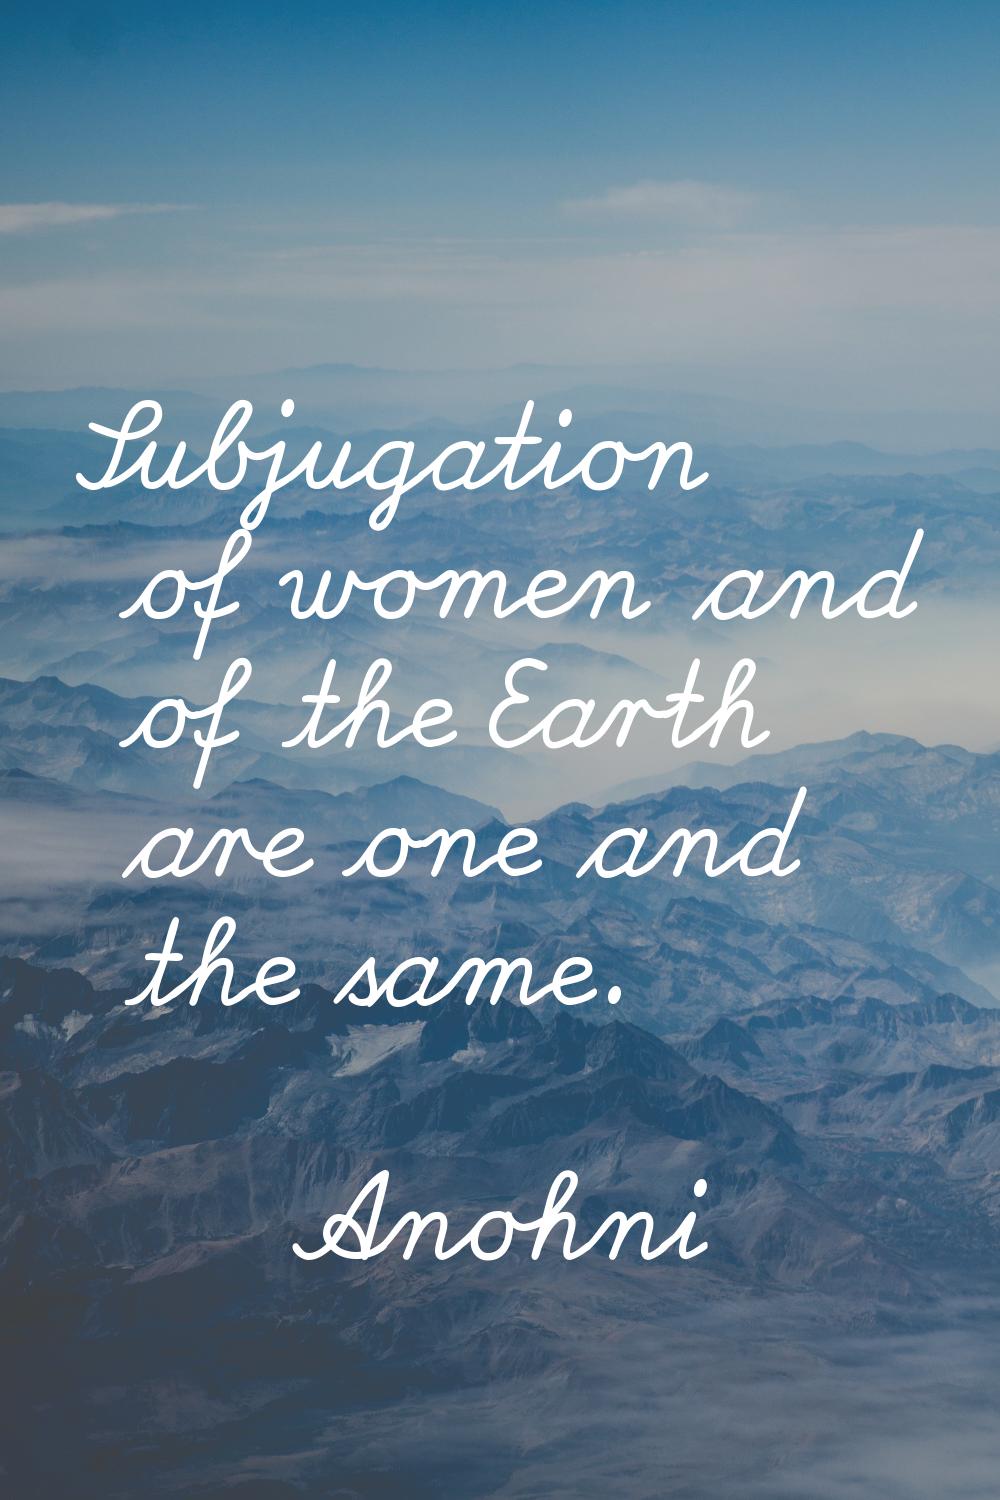 Subjugation of women and of the Earth are one and the same.